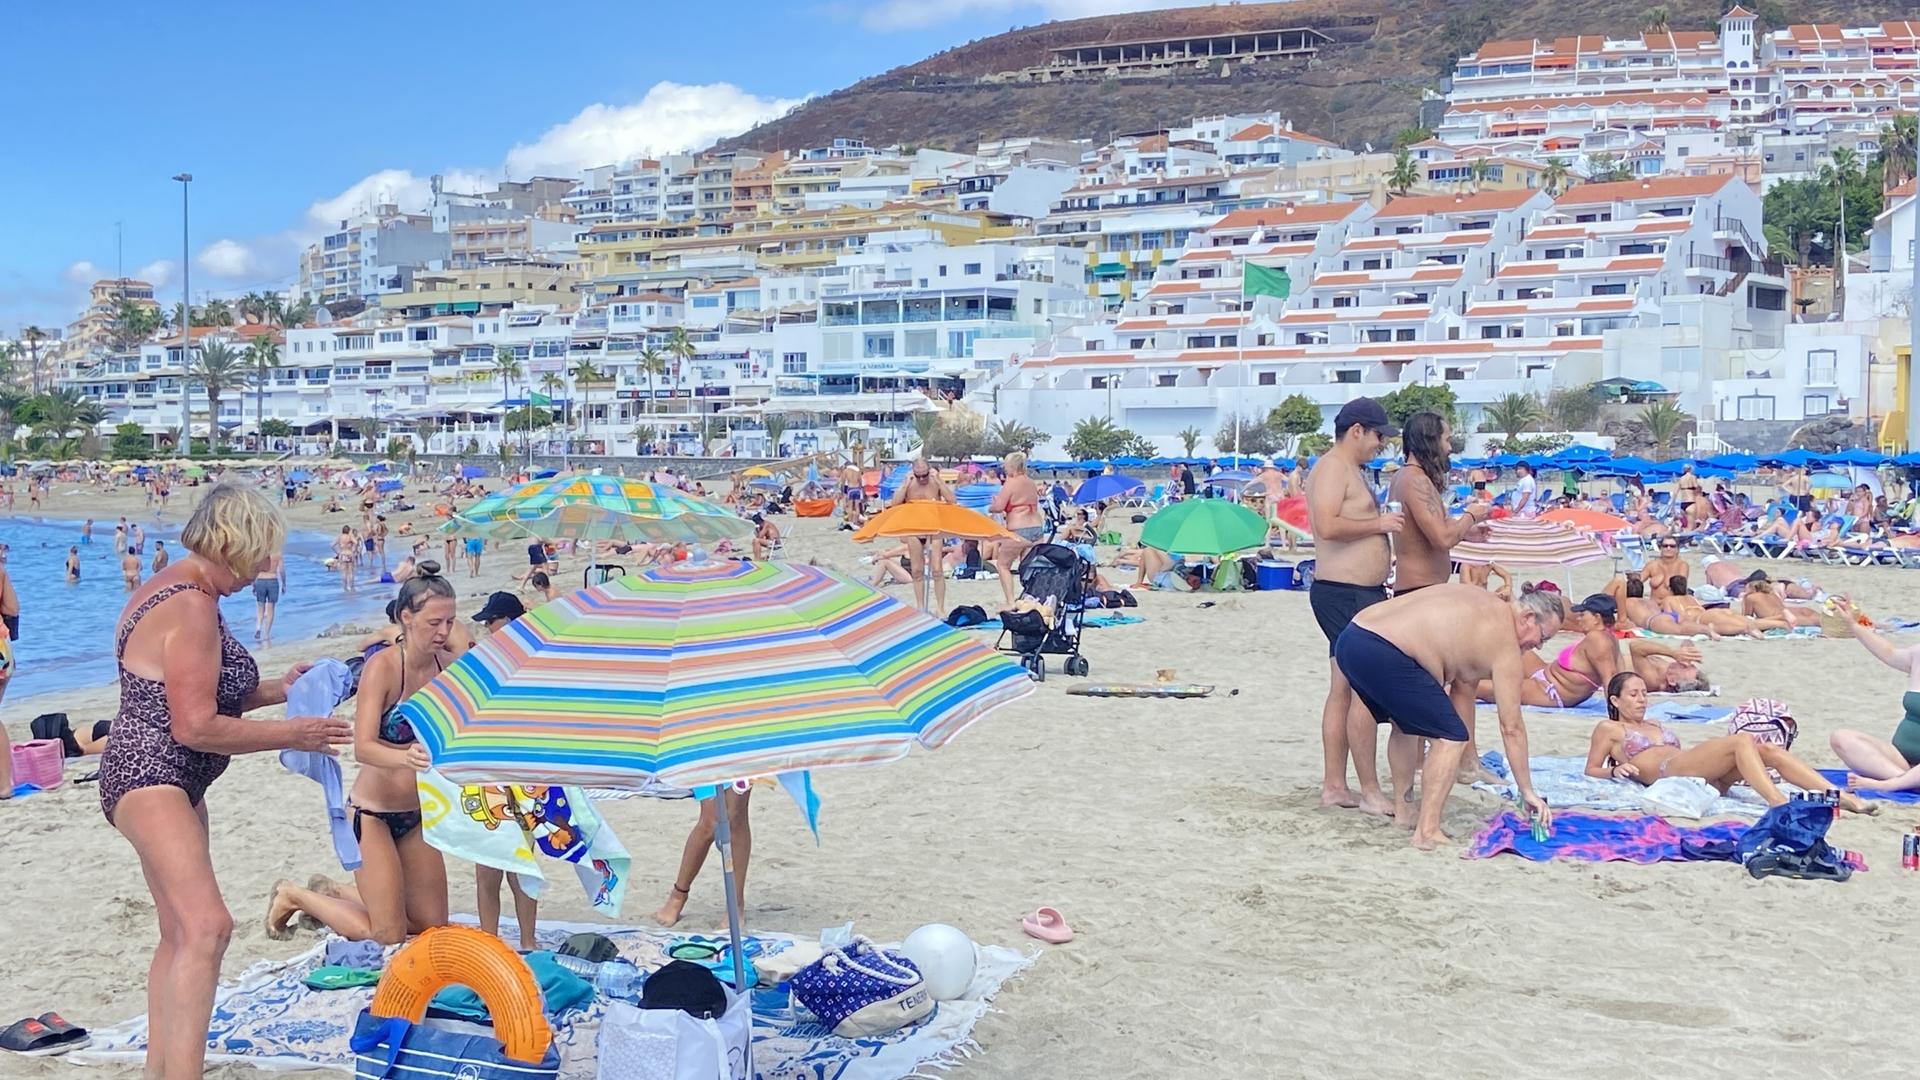 Just a 45-minute ferry ride from La Gomera, there's plenty of partying and sun-bathing to be had on Tenerife.